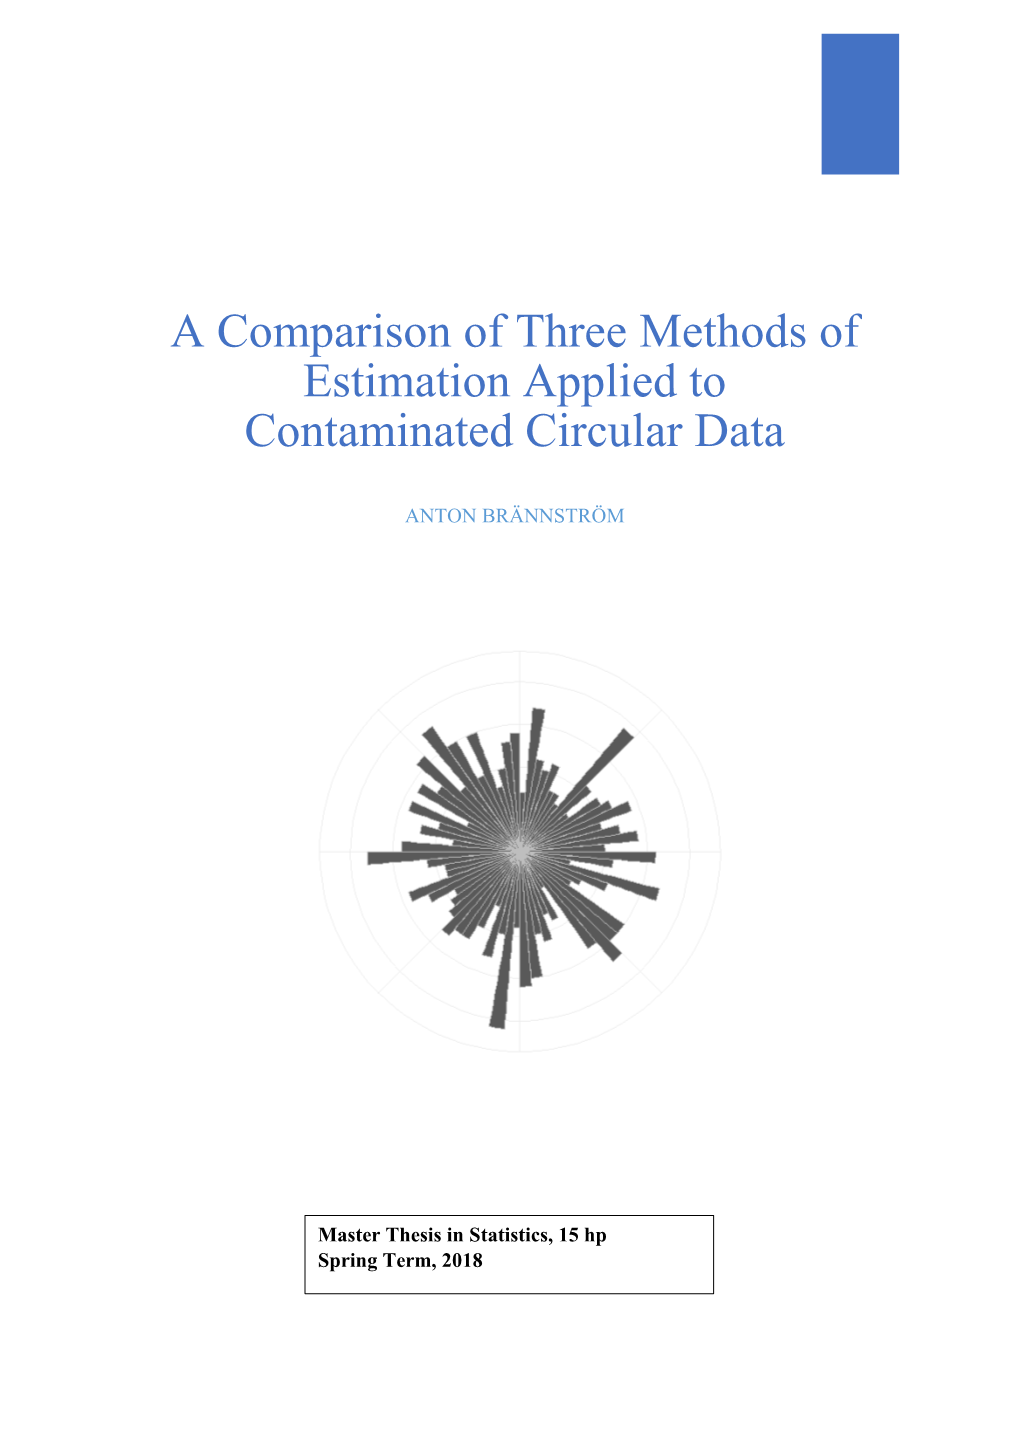 A Comparison of Three Methods of Estimation Applied to Contaminated Circular Data